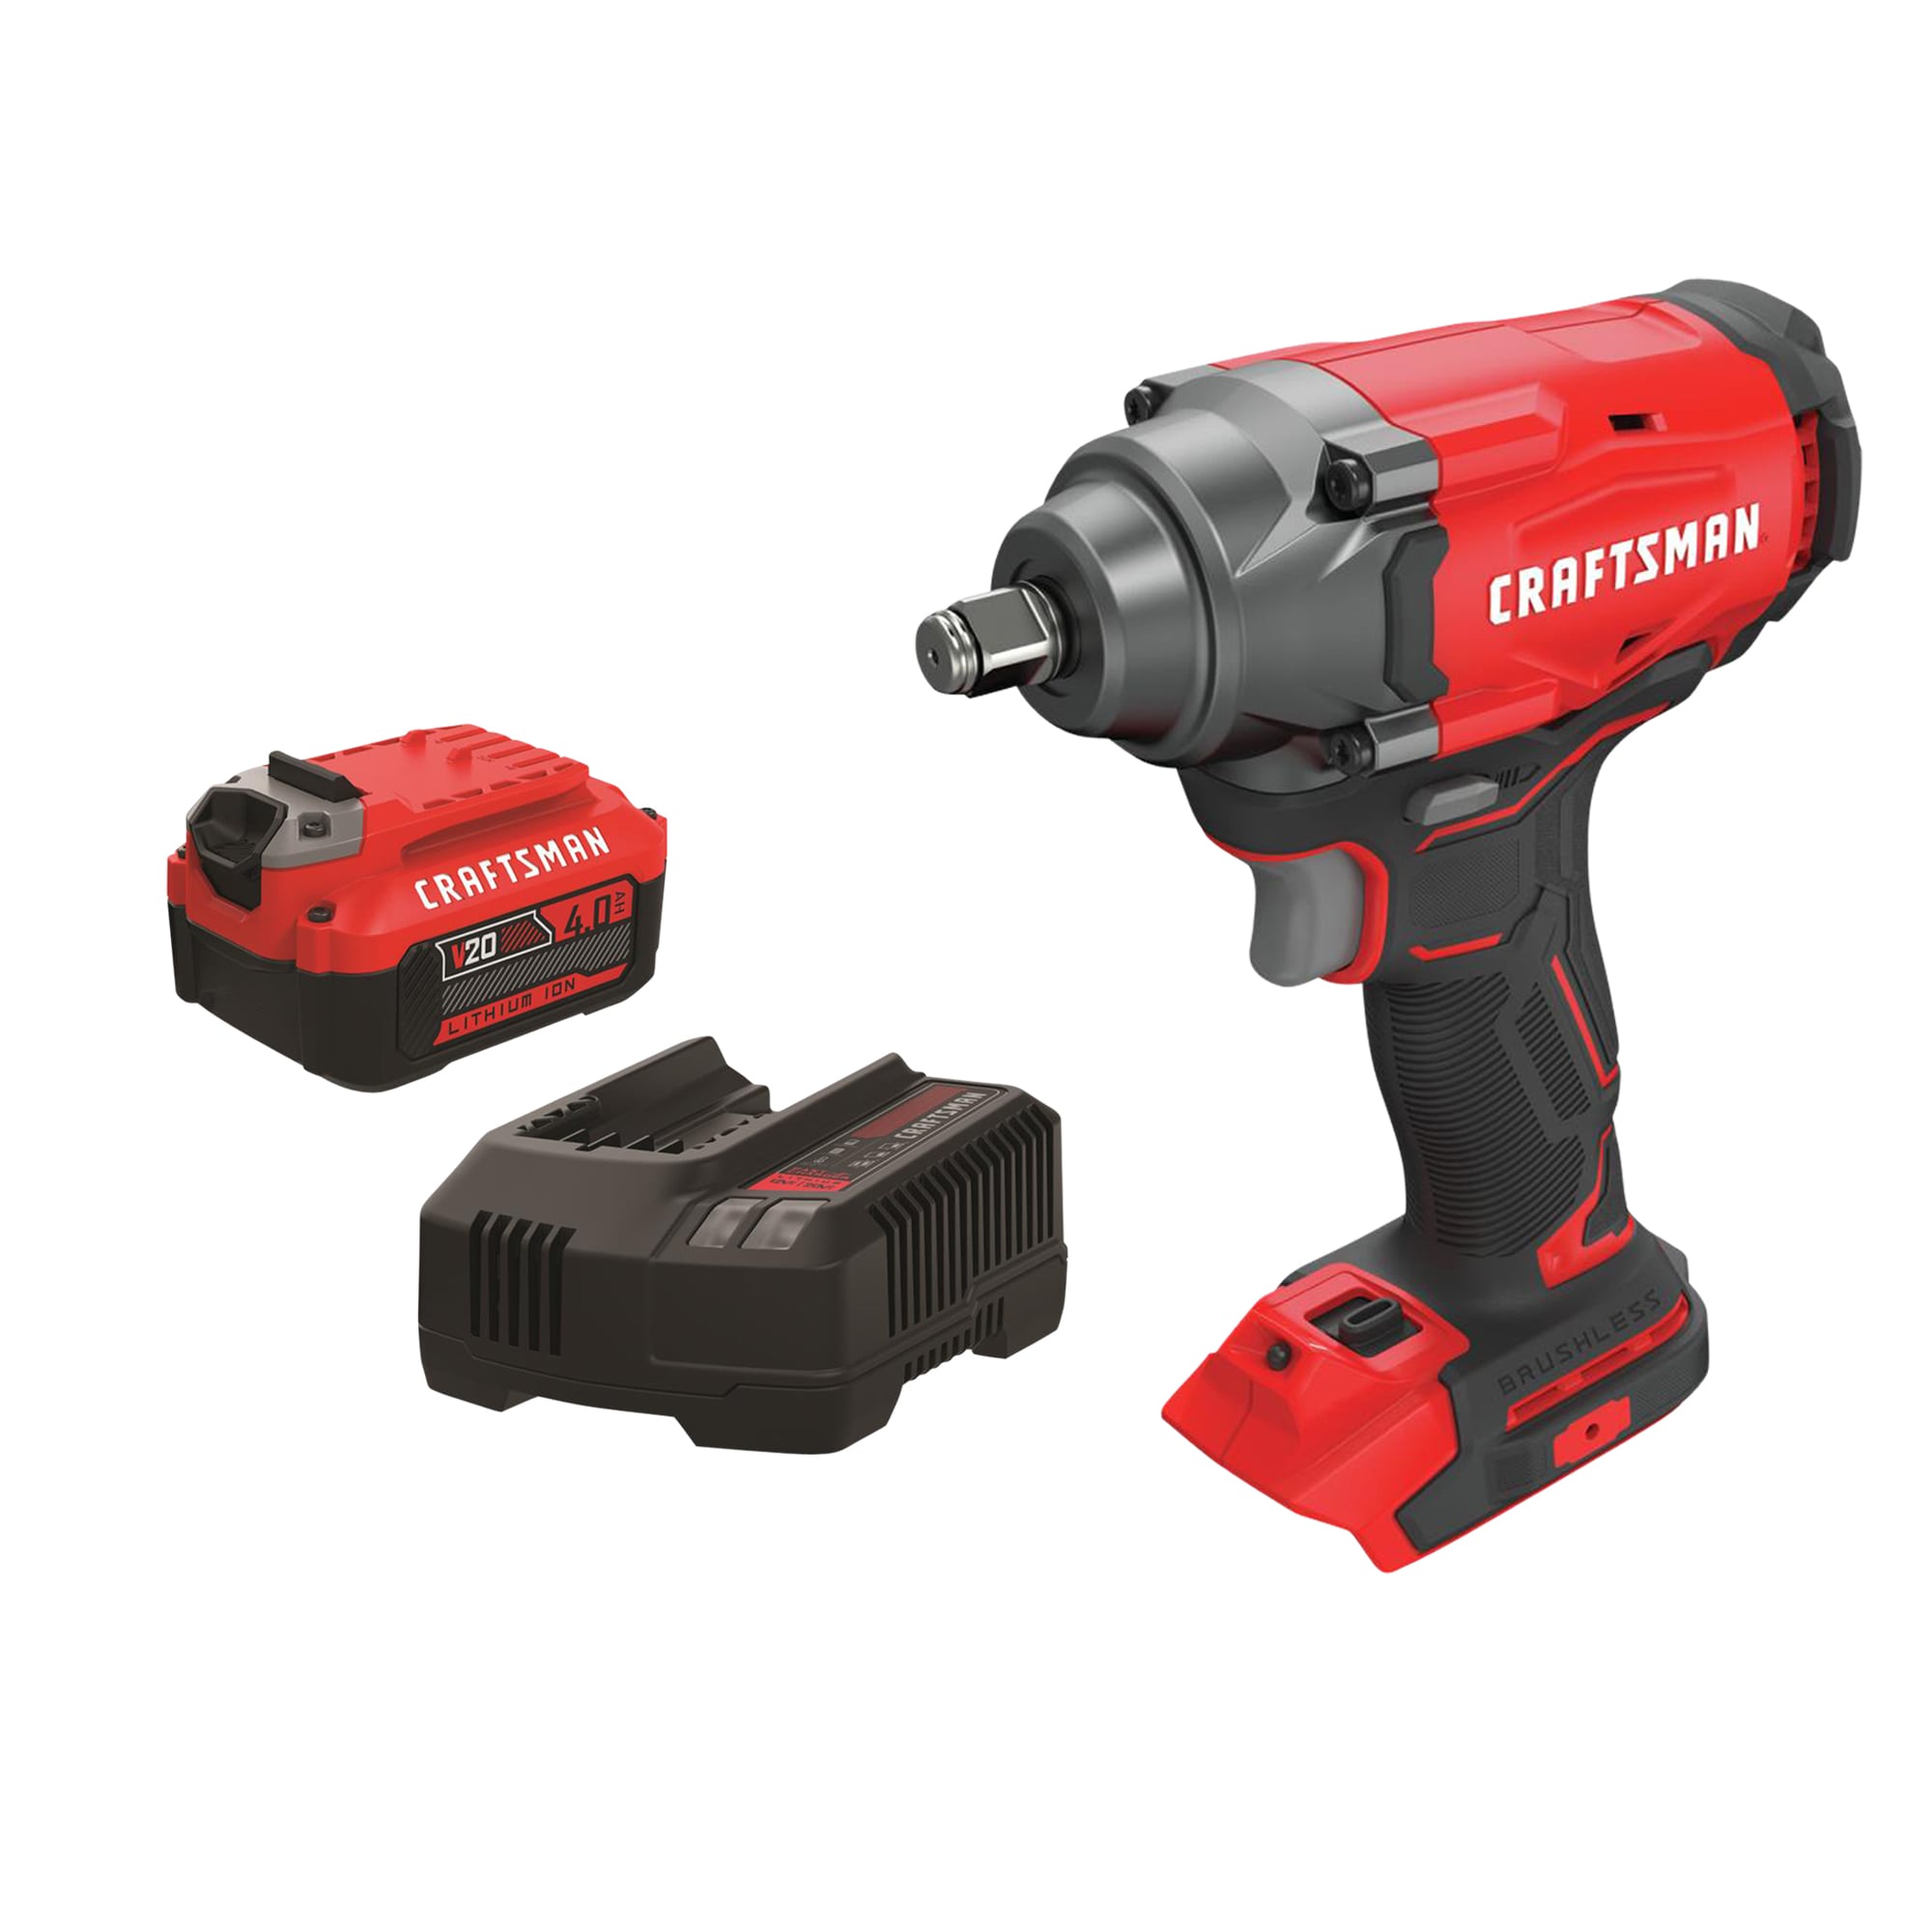 CRAFTSMAN V20 20-volt Max Variable Speed Brushless 1/2-in Drive Cordless  Impact Wrench & V20 20-Volt Max 4 Amp-Hour Lithium Power Tool Battery Kit